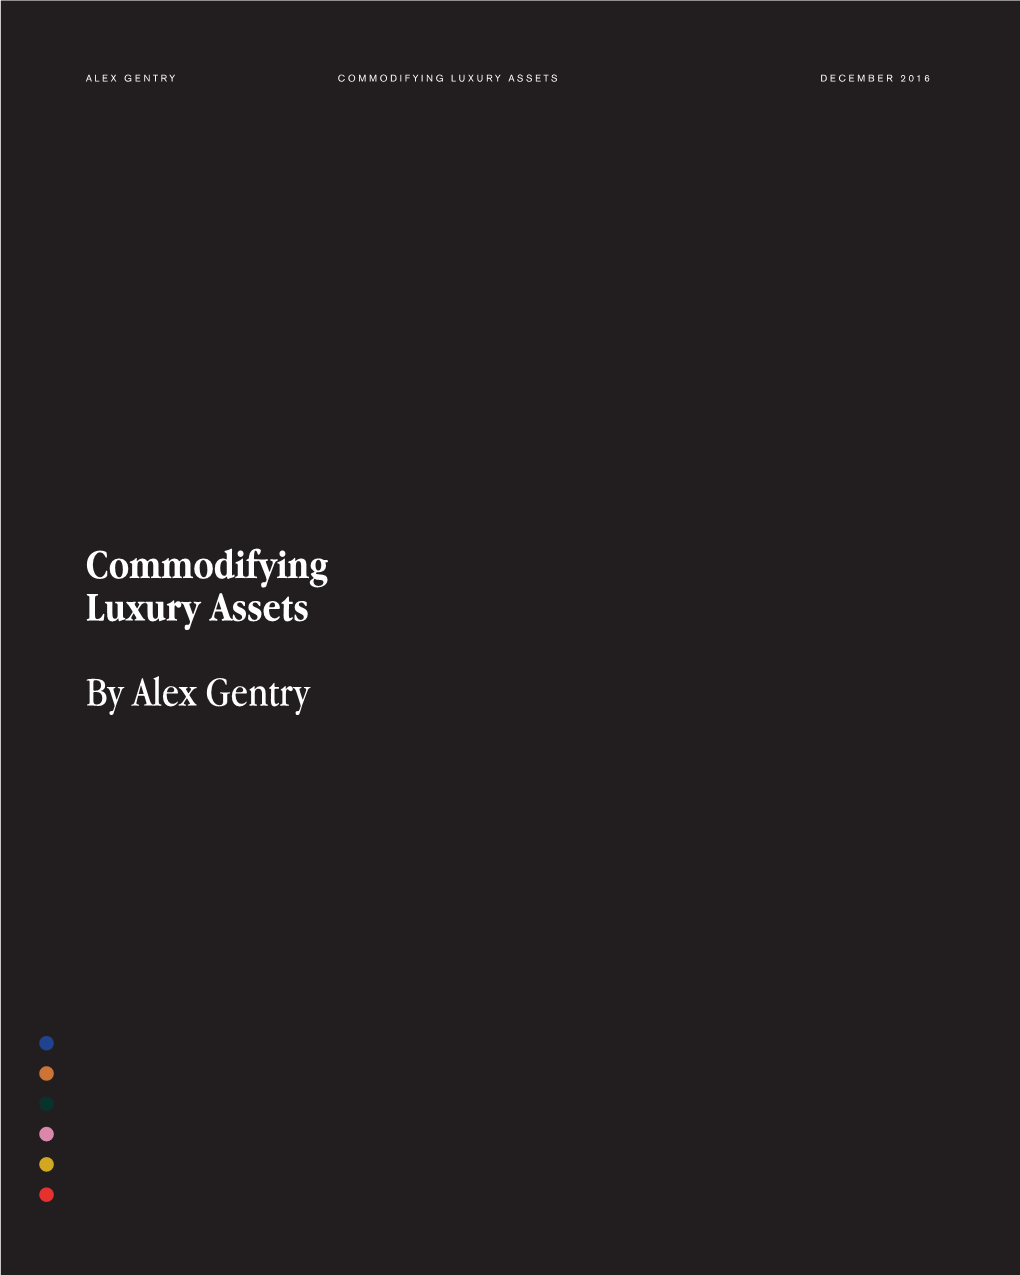 Commodifying Luxury Assets by Alex Gentry